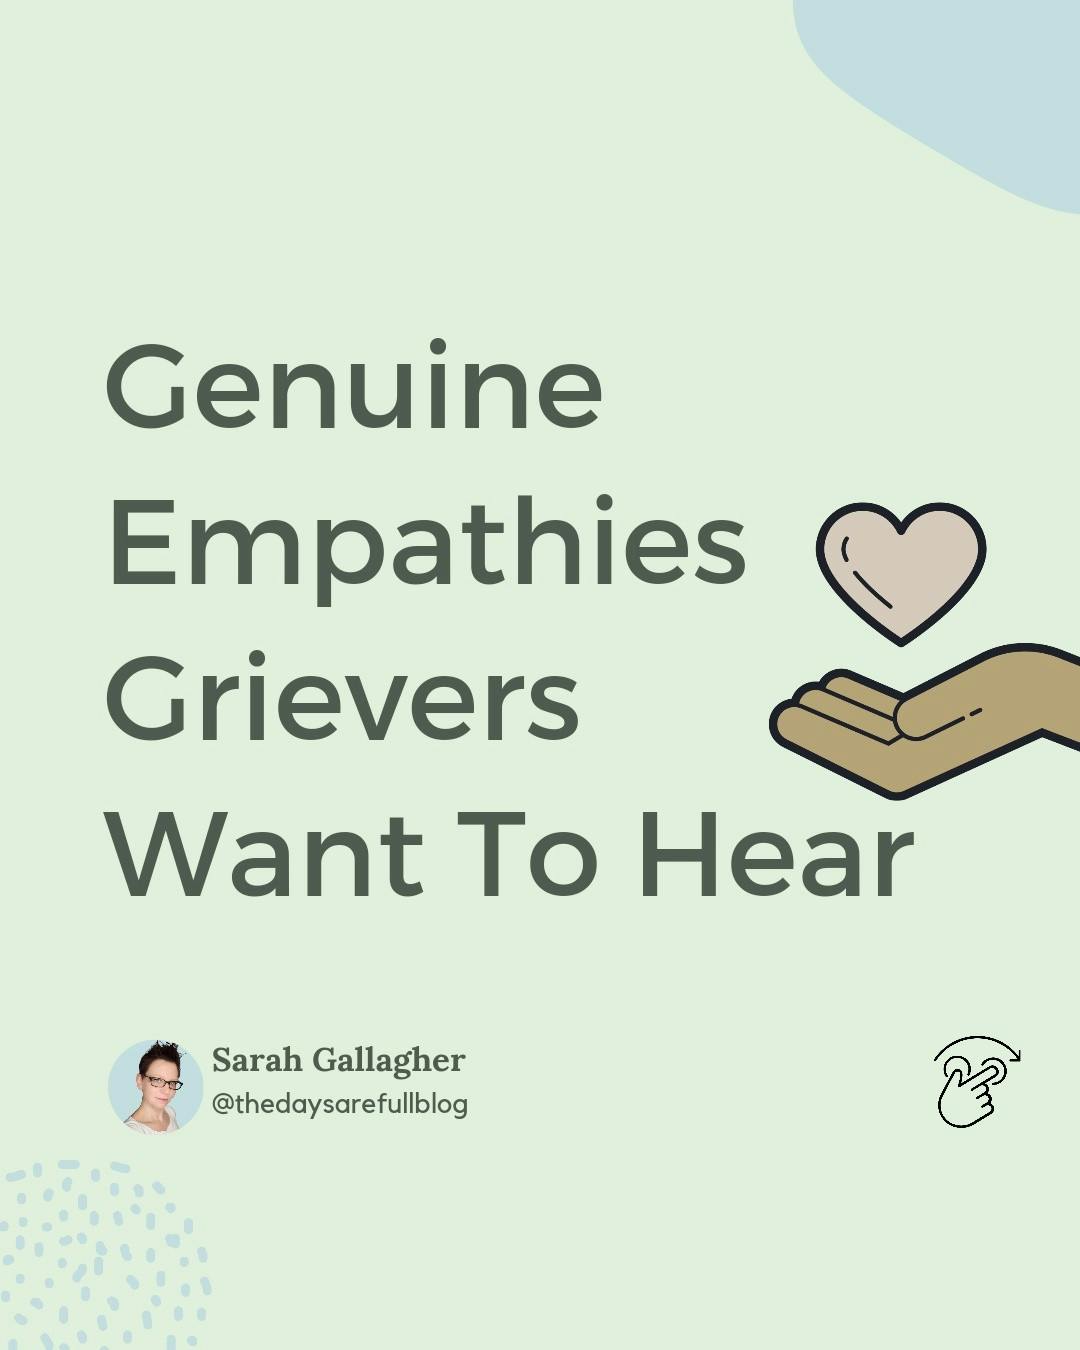 Genuine Empathies Grievers Want to hear.

When someone is greiving the belonging to a support system comes naturally. But we often don't understand the impact of our words.

Our intention might not be wrong, we definitely are just trying to be an urnest support to the grievers but that might not be the case.

Here's some examples of genuine Empathies a griever wants to hear. Take a look and try to lend your support to the person you know greiving.

What other empathies will you add here that a griever would like to hear?

.
.
.
#sarahgallagher #thedaysarefullblog 
#widowshelpingwidows #widowsofinstagram #griefcoach #lifeafterloss  #lifejourney #lifejourneys #griefjourney #widows #widowspeak #youngwidows #griefquotes #griefjourney #griefsupport #griefsucks #griefawarness #griefandloss #griefshare #griefrevolution #griefwork #widowshelpingwidows #widowhood #widowlife  #thegriefgal #widowclub #youngwidows #griefrecovery #griefwork #griefjourney